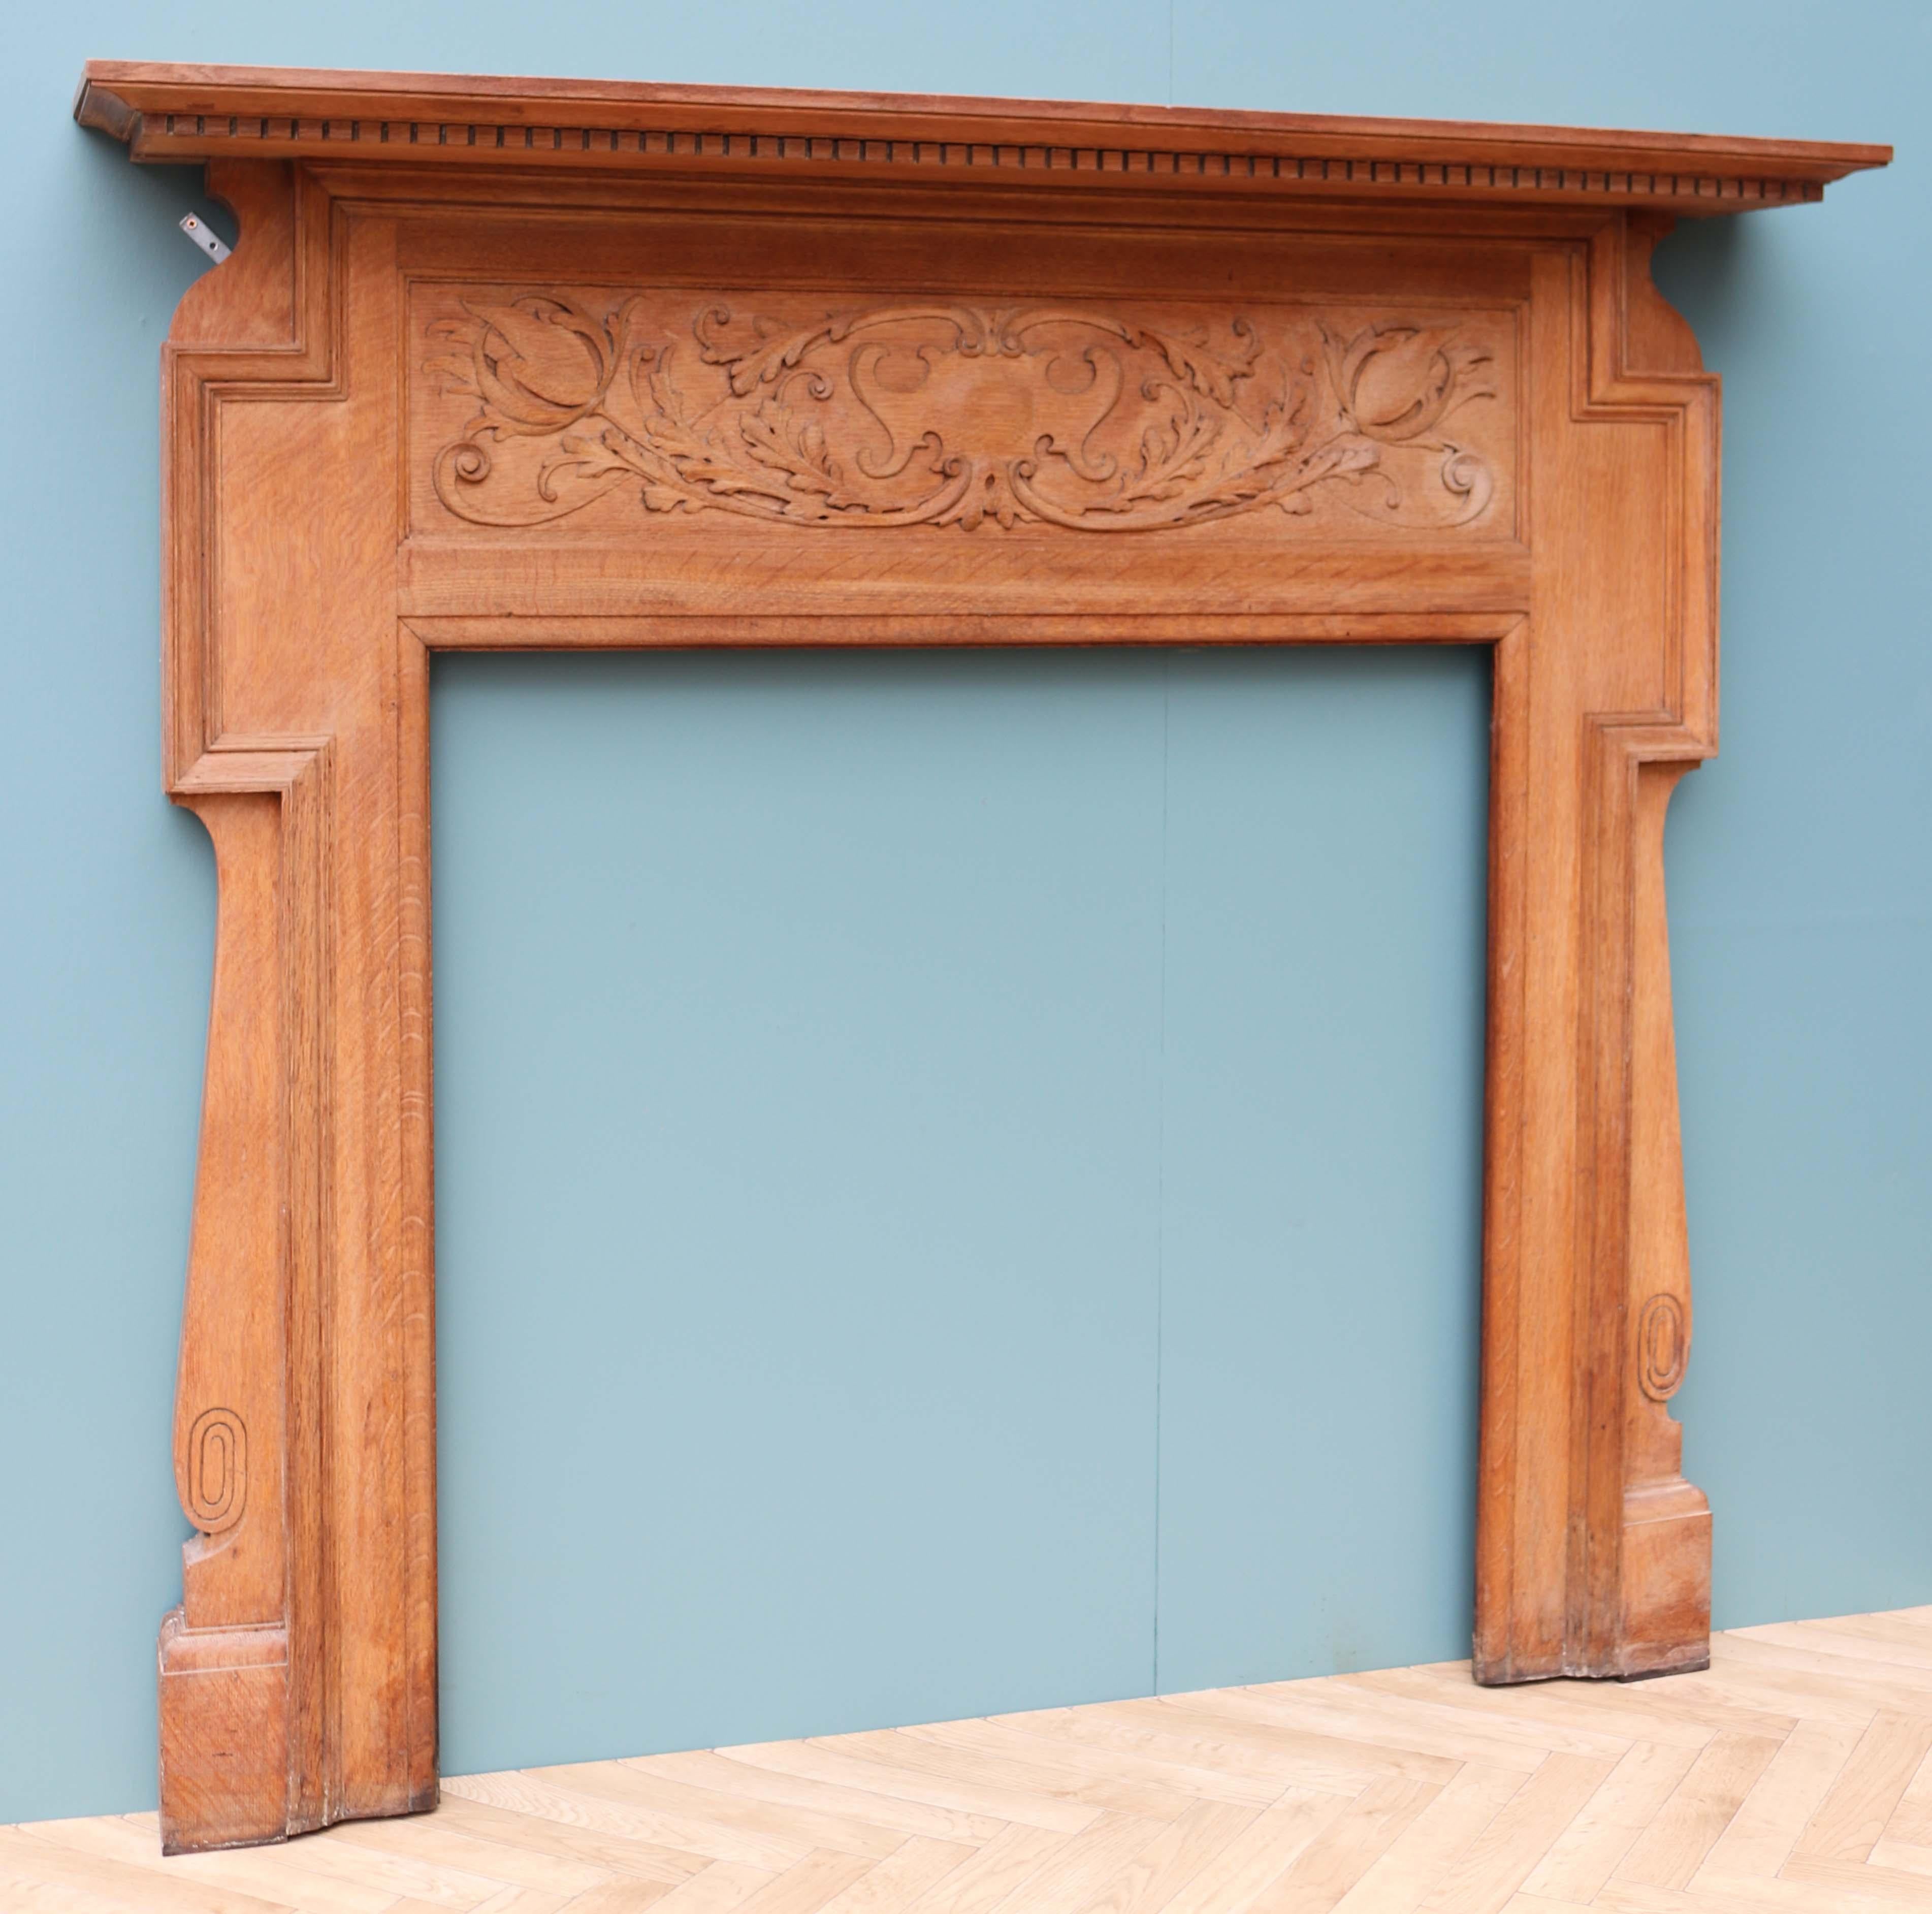 Antique Art Nouveau Oak Fireplace Surround In Good Condition For Sale In Wormelow, Herefordshire